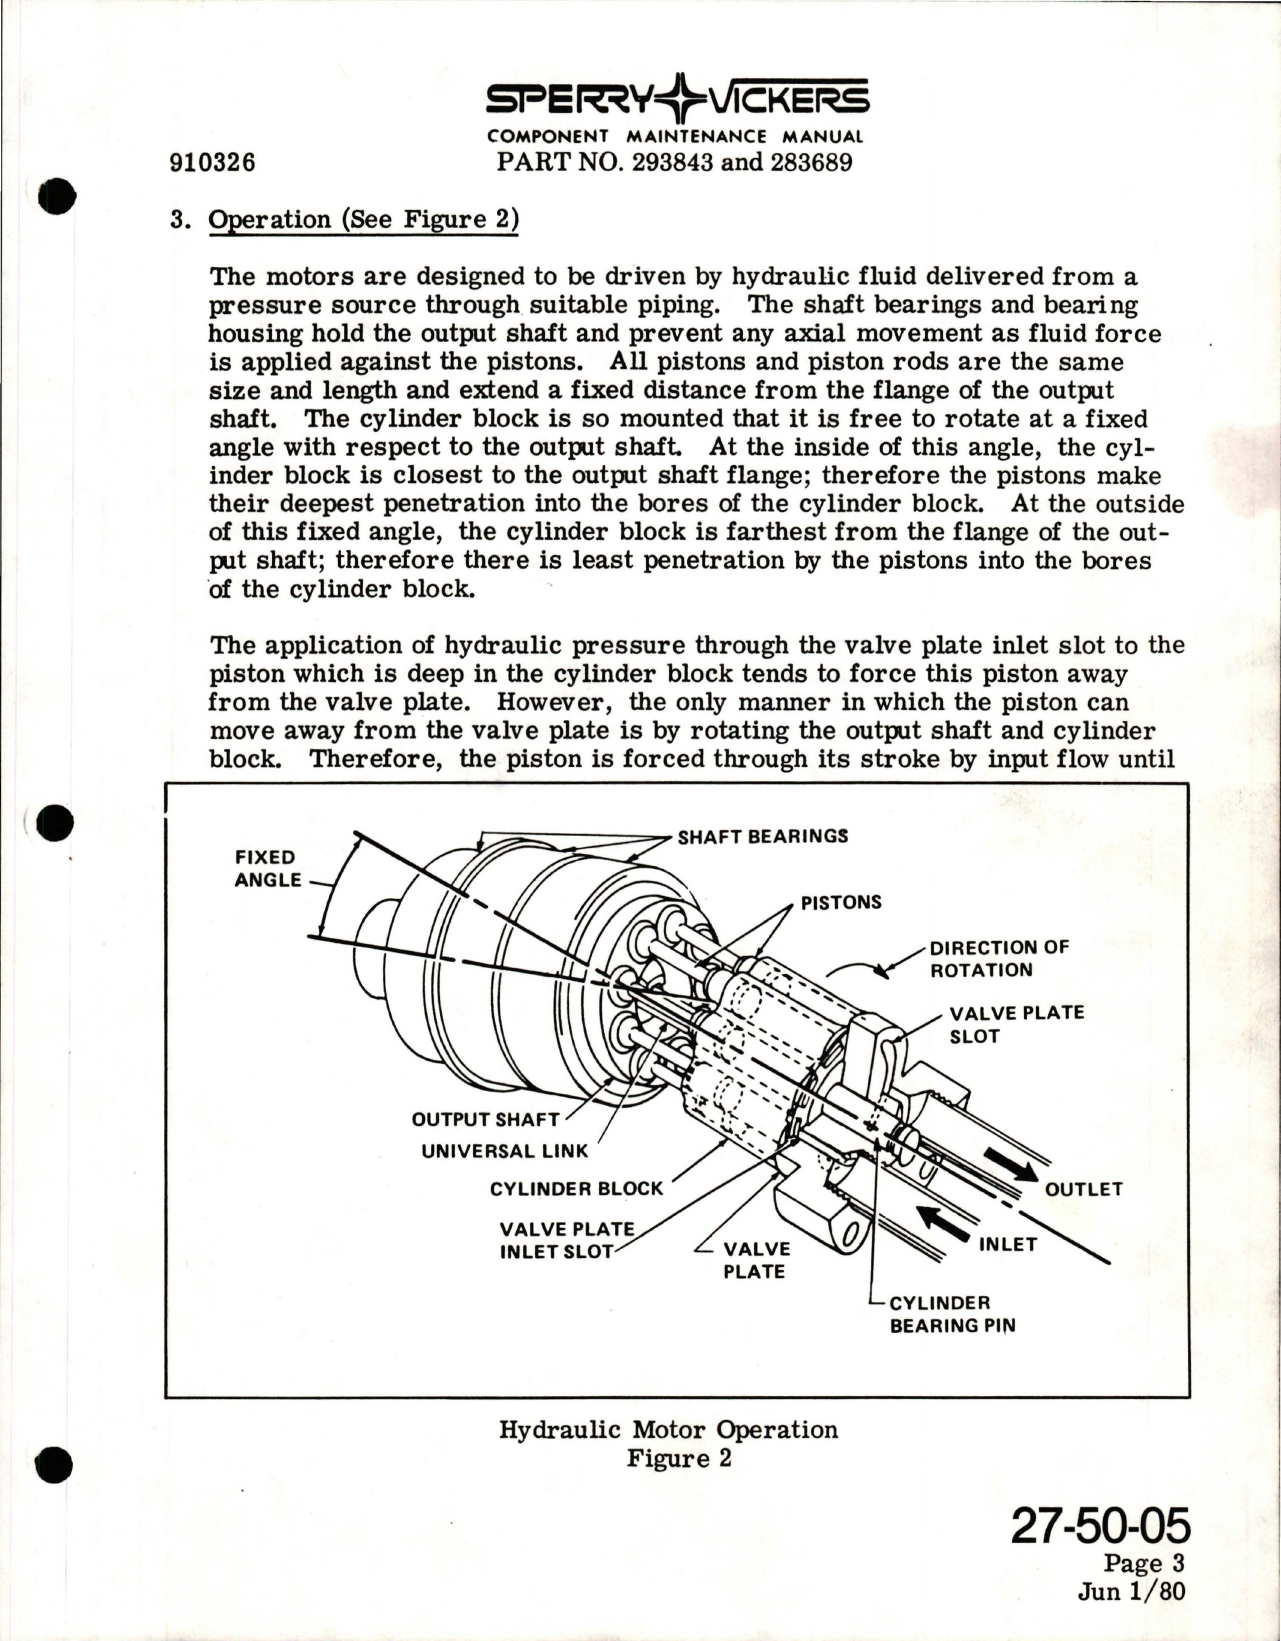 Sample page 9 from AirCorps Library document: Maintenance Manual with Illustrated Parts List for Constant Displacement Hydraulic Motor Assembly - Parts 293843 and 283689